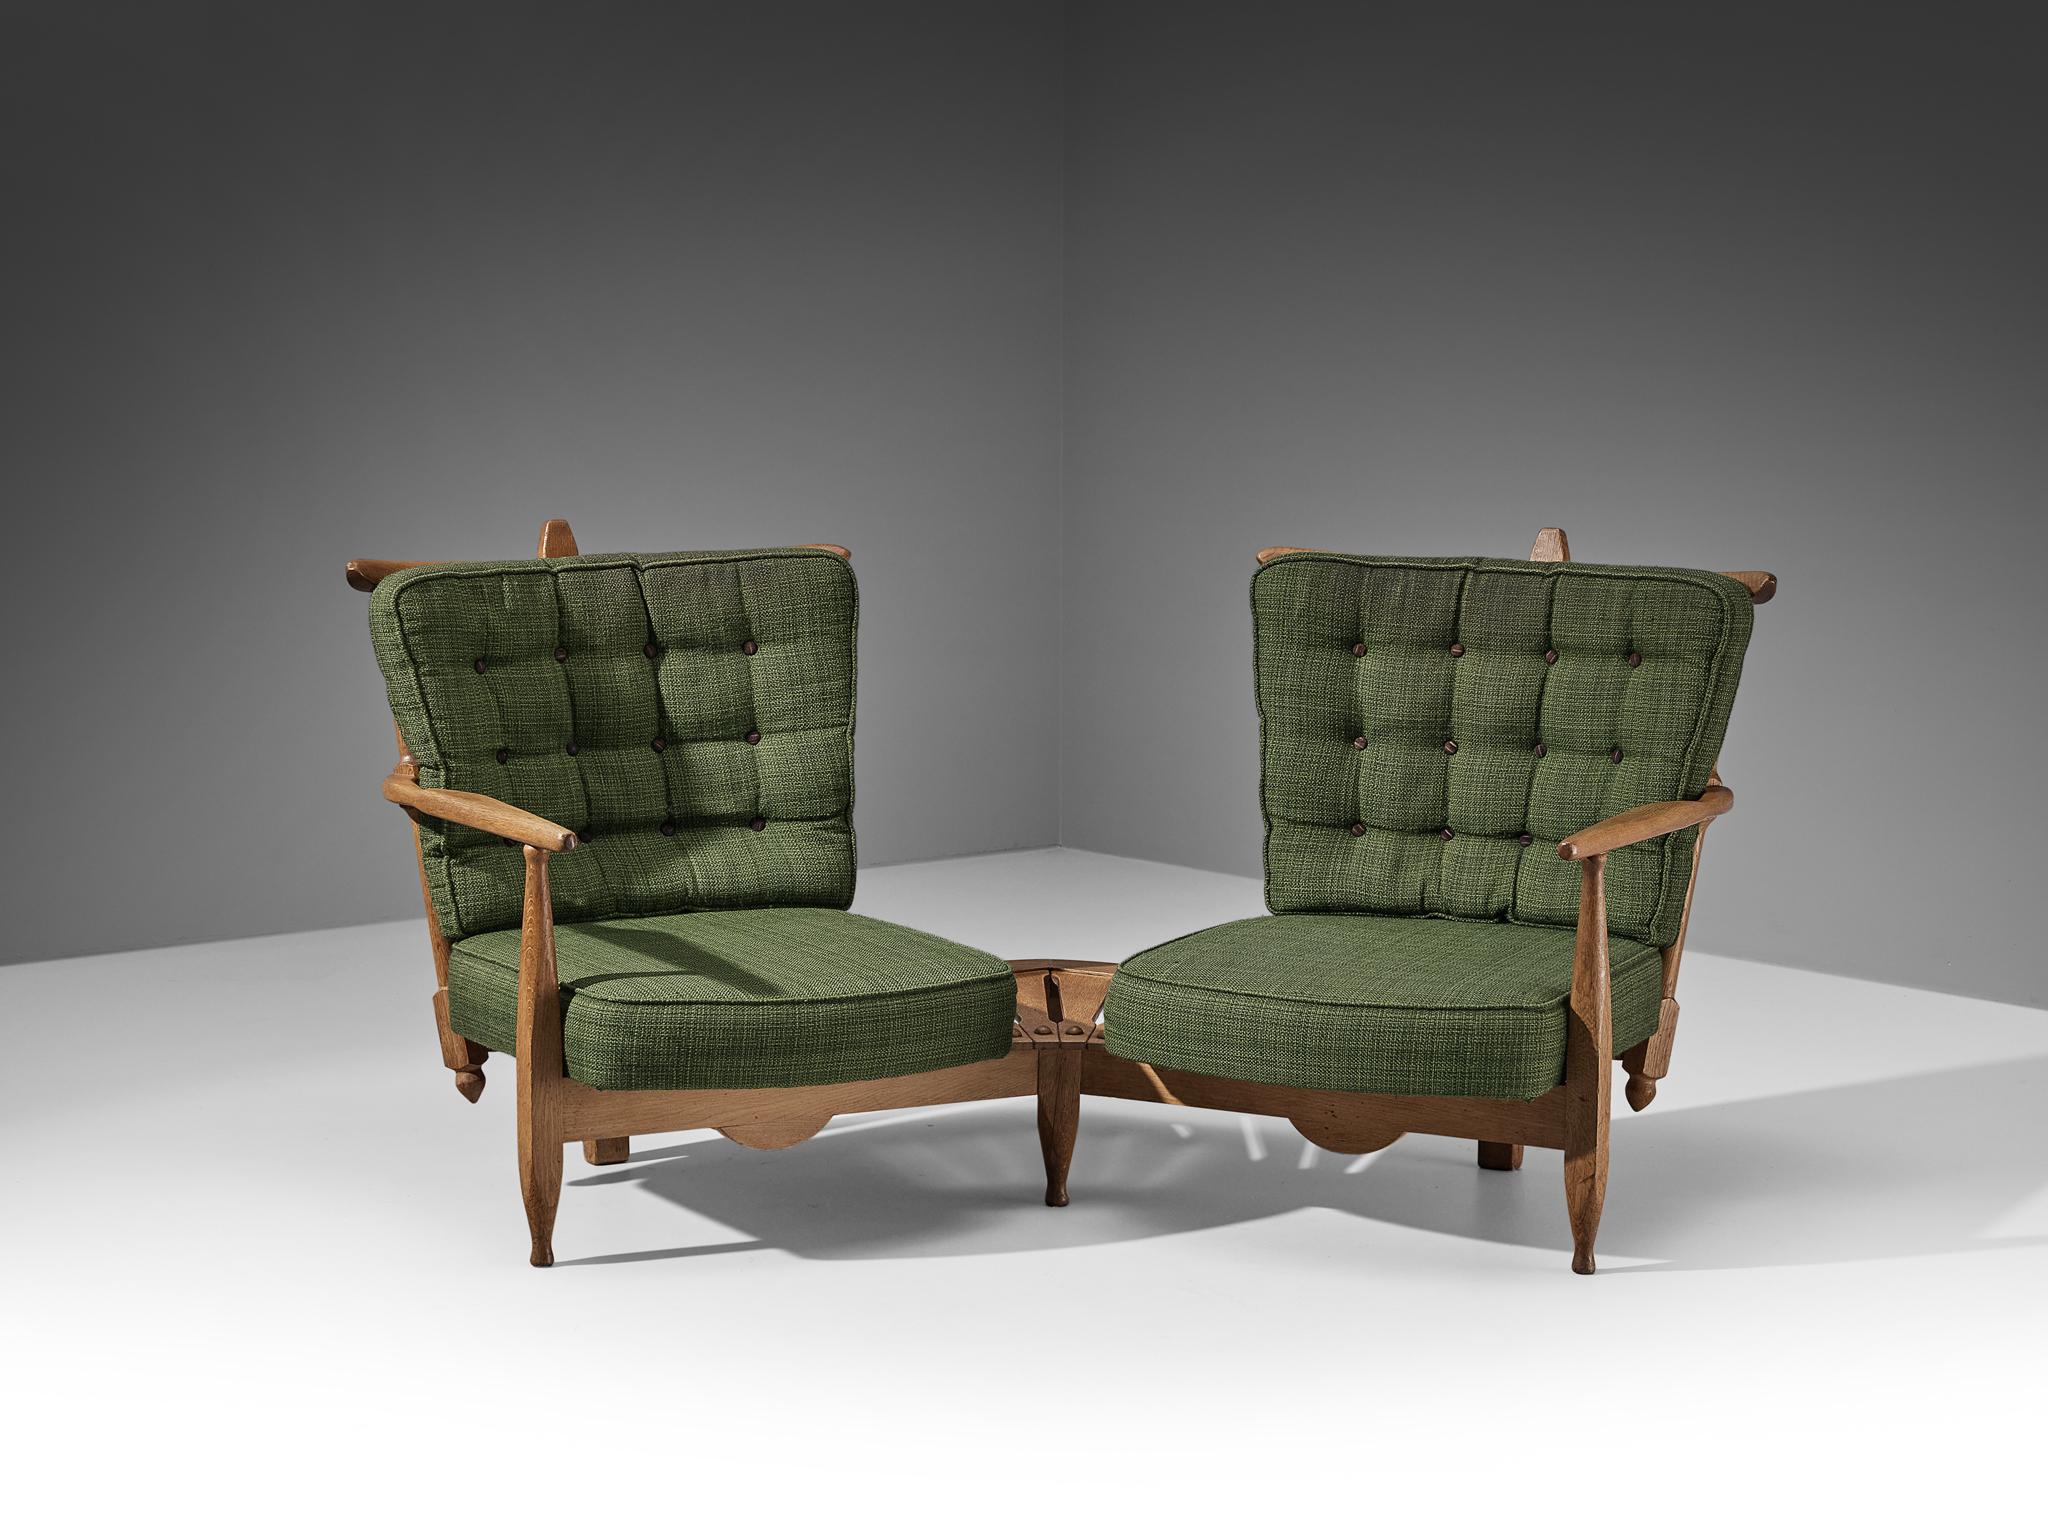 Guillerme et Chambron for Votre Maison, lounge chairs with side table, oak, green fabric, France, 1960s 

Guillerme and Chambron are known for their high quality solid oak furniture, from which this piece is another great example. The curved slatted